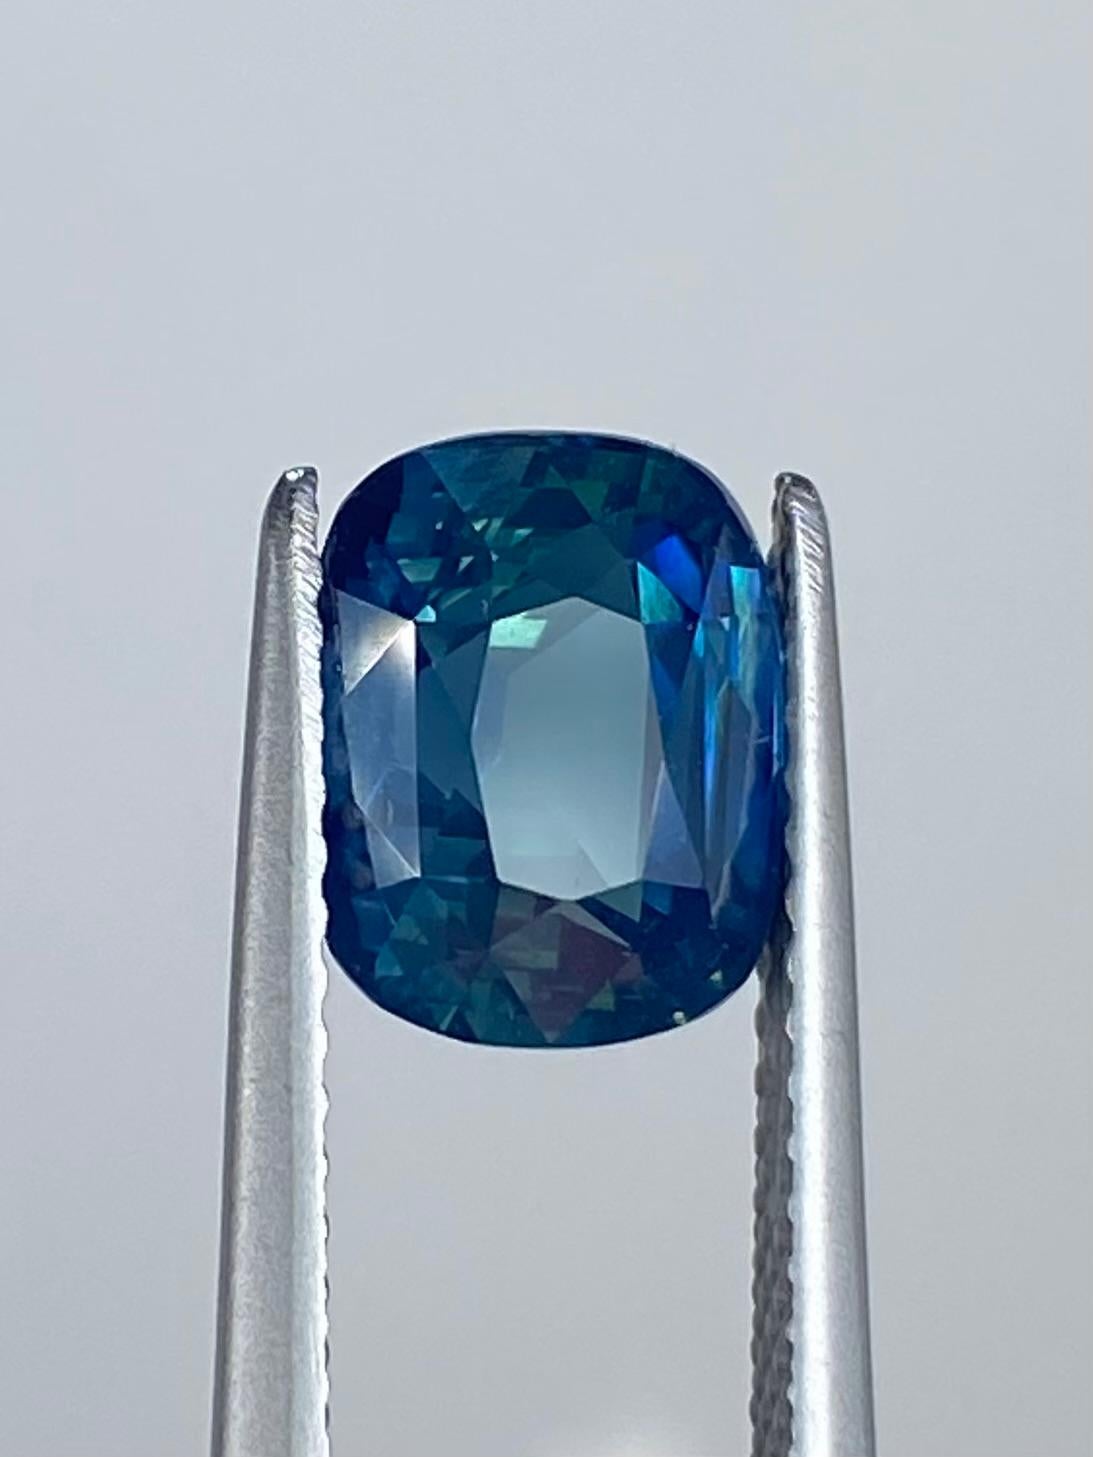 The Sapphire Merchant presents this stunning natural Opalescent Teal Blue Sapphire. This exquisite gemstone boasts an impressive 3.00 carats and is presented in a timeless cushion shape that radiates with elegance. With its VVS clarity, it is